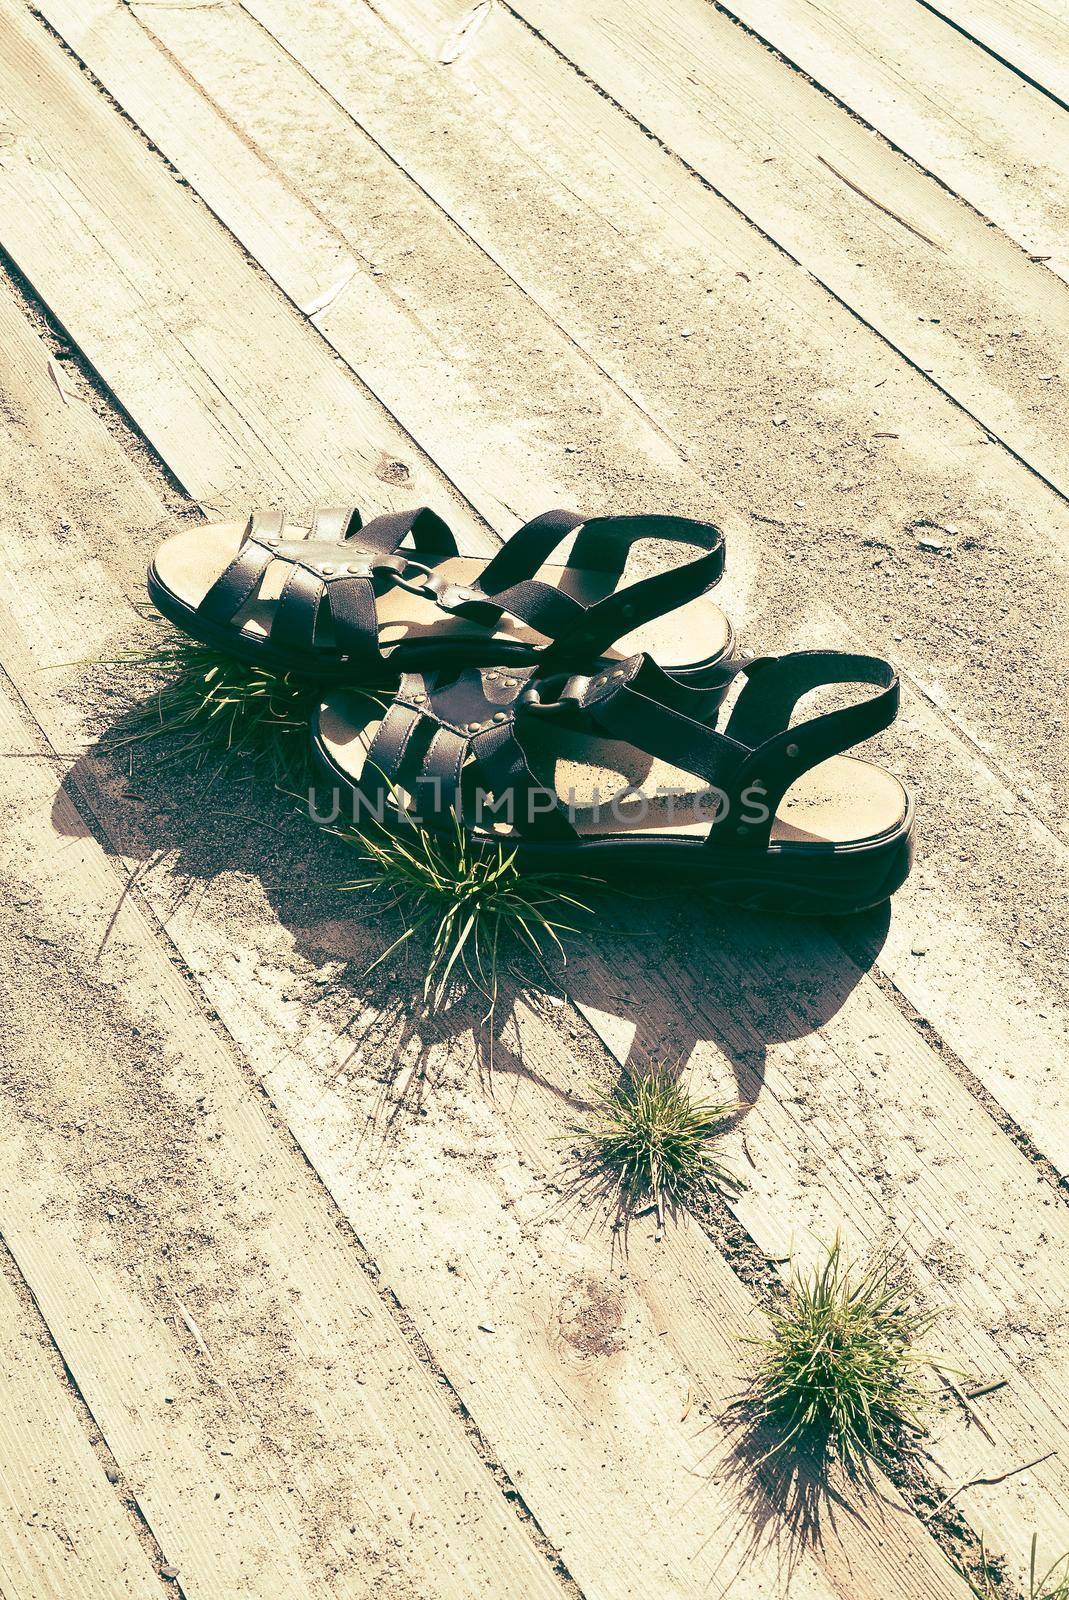 Woman summer sandals in warm sunshine on wooden planks with sand and grass, with free empty space for copy - Concept of relaxing vacation, summertime travel and recreation by h.angelica_corneliussen